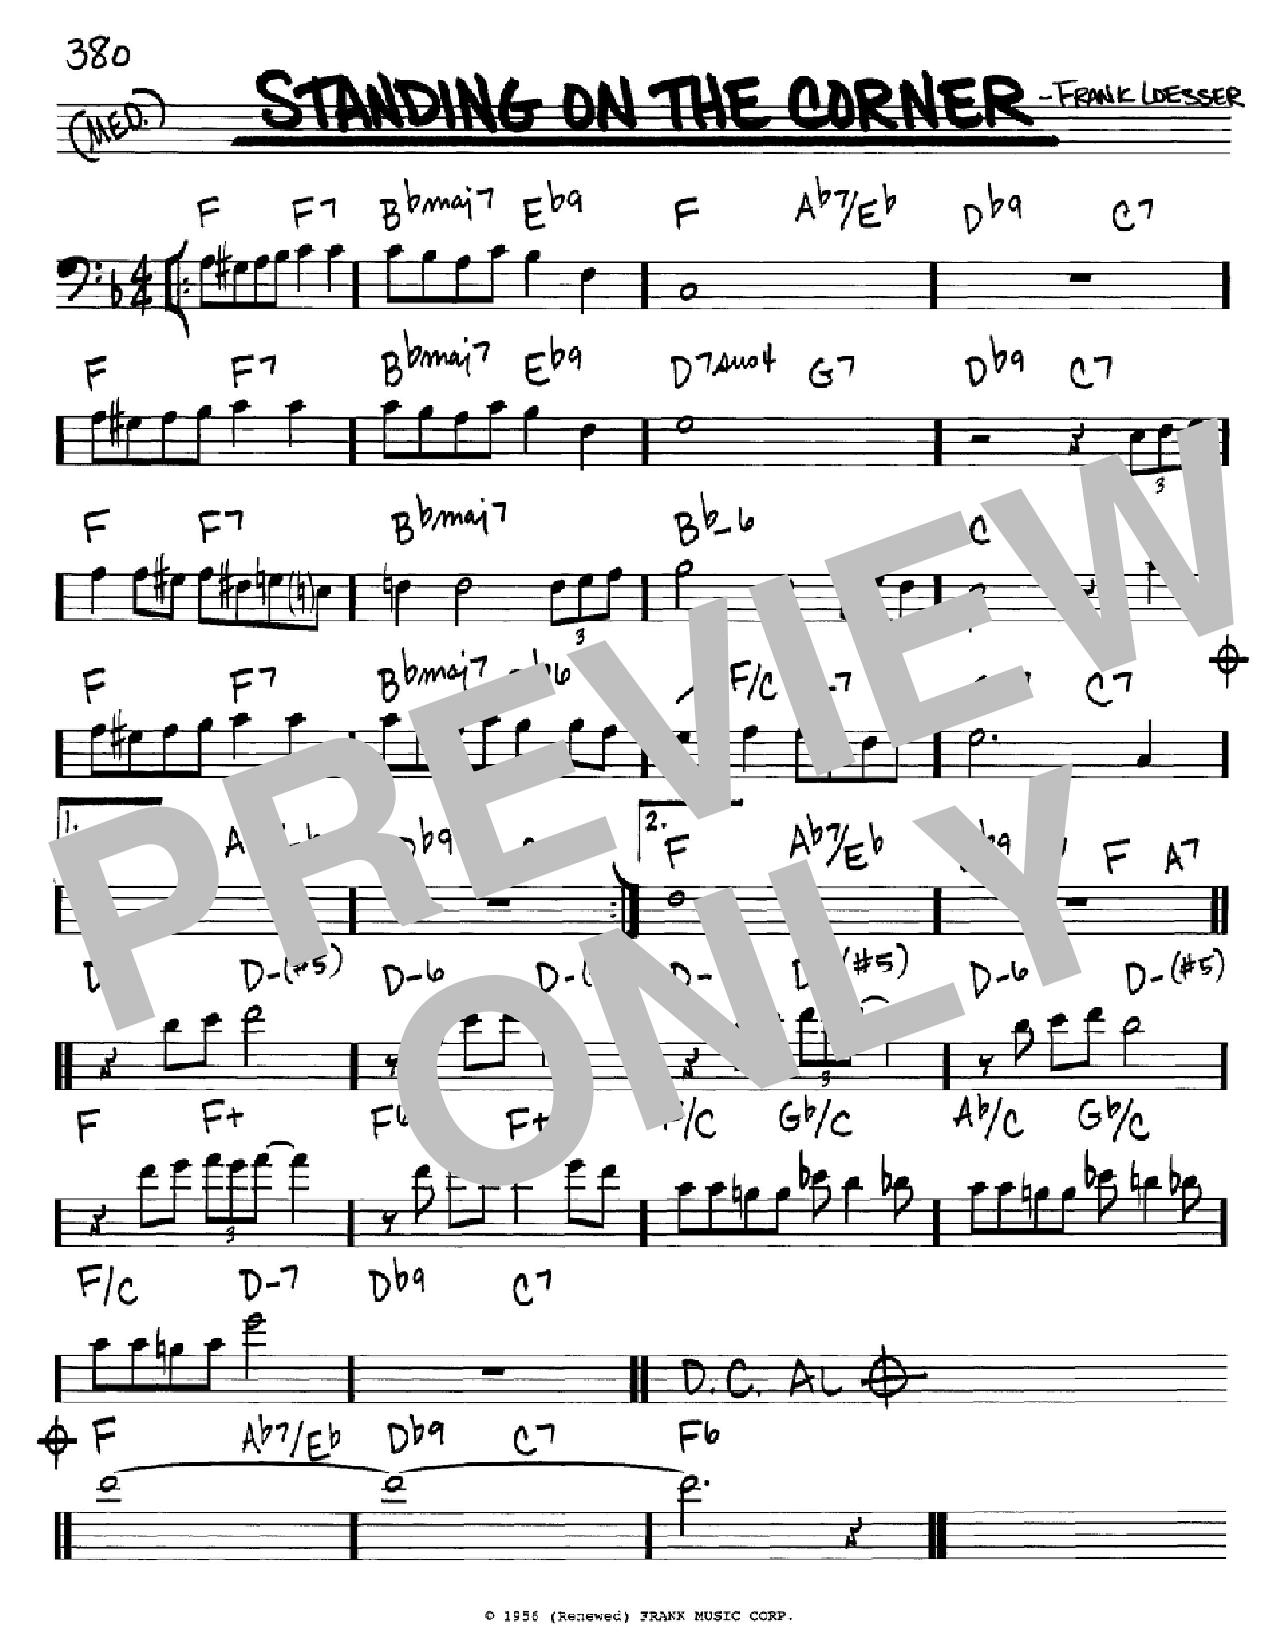 Download The Four Lads Standing On The Corner Sheet Music